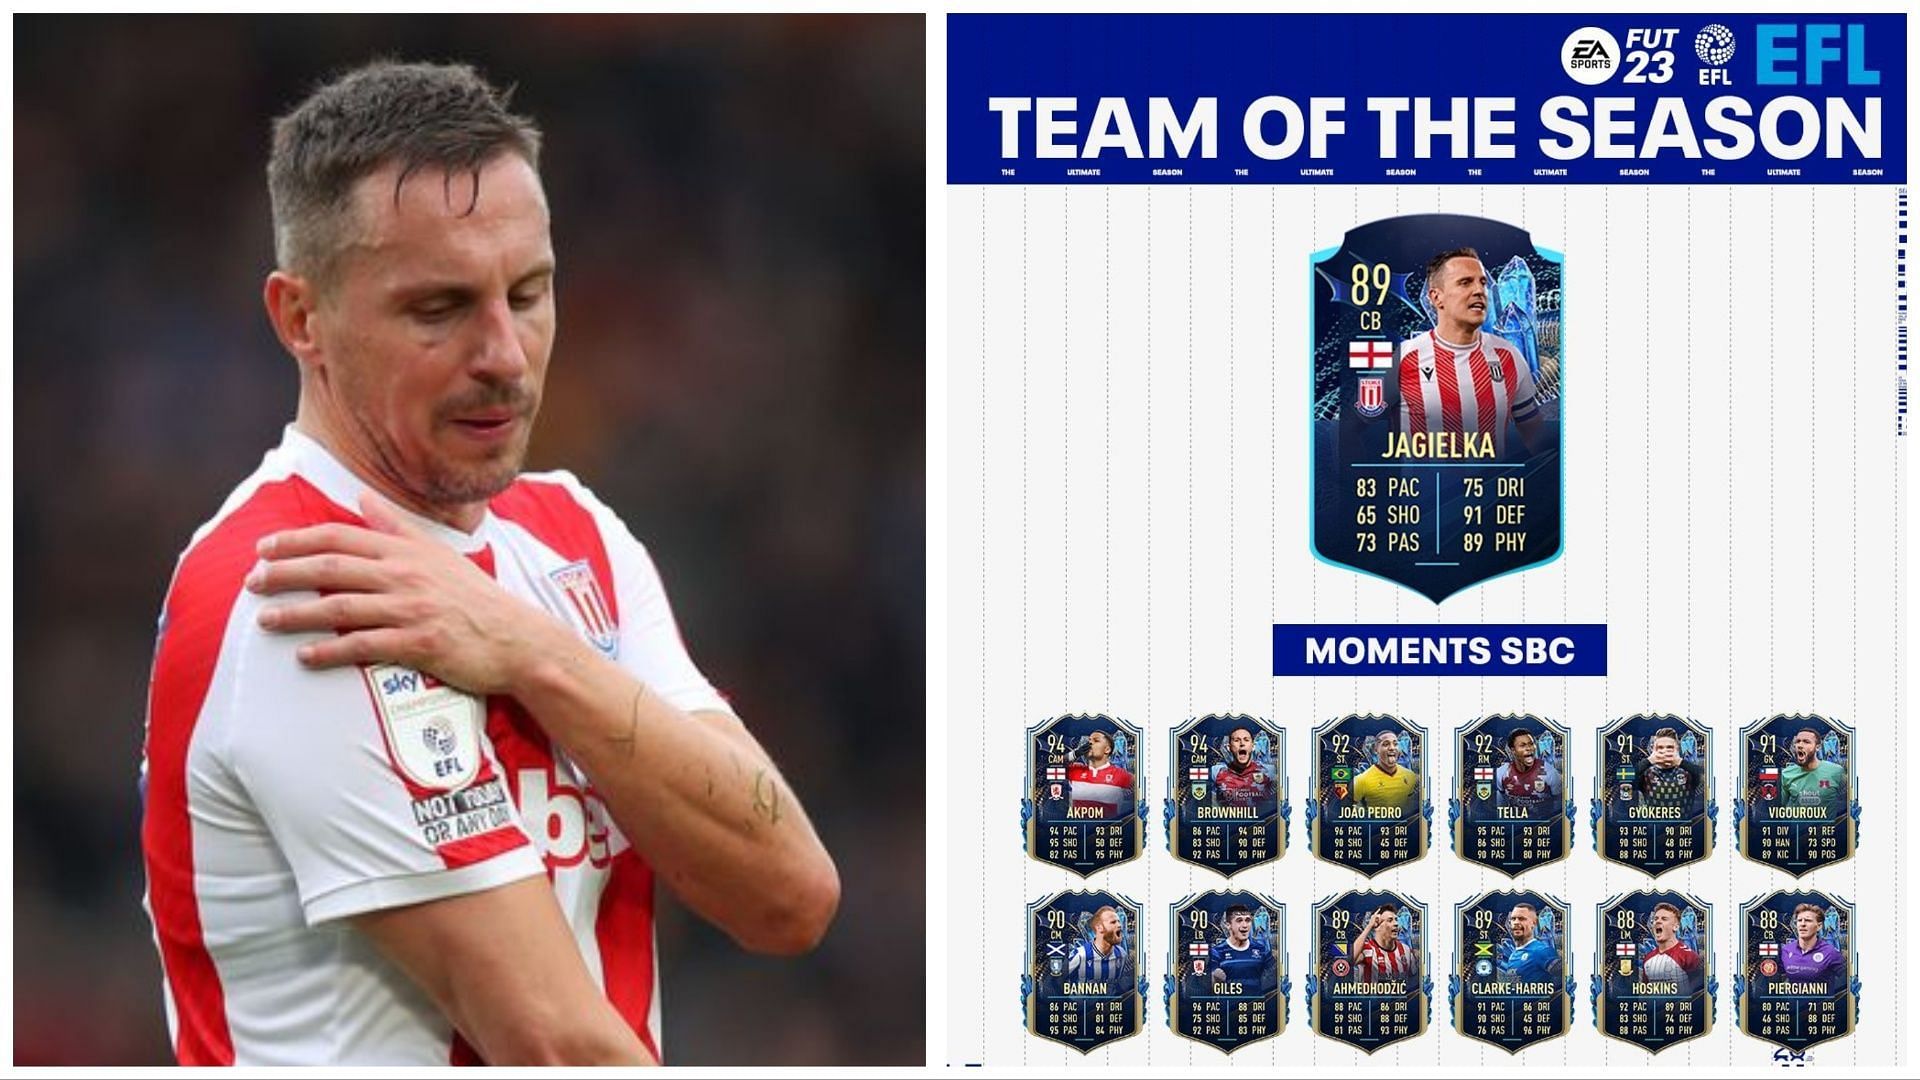 TOTS Moments Jagielka is now live in FIFA 23 (Images via Getty and EA Sports)